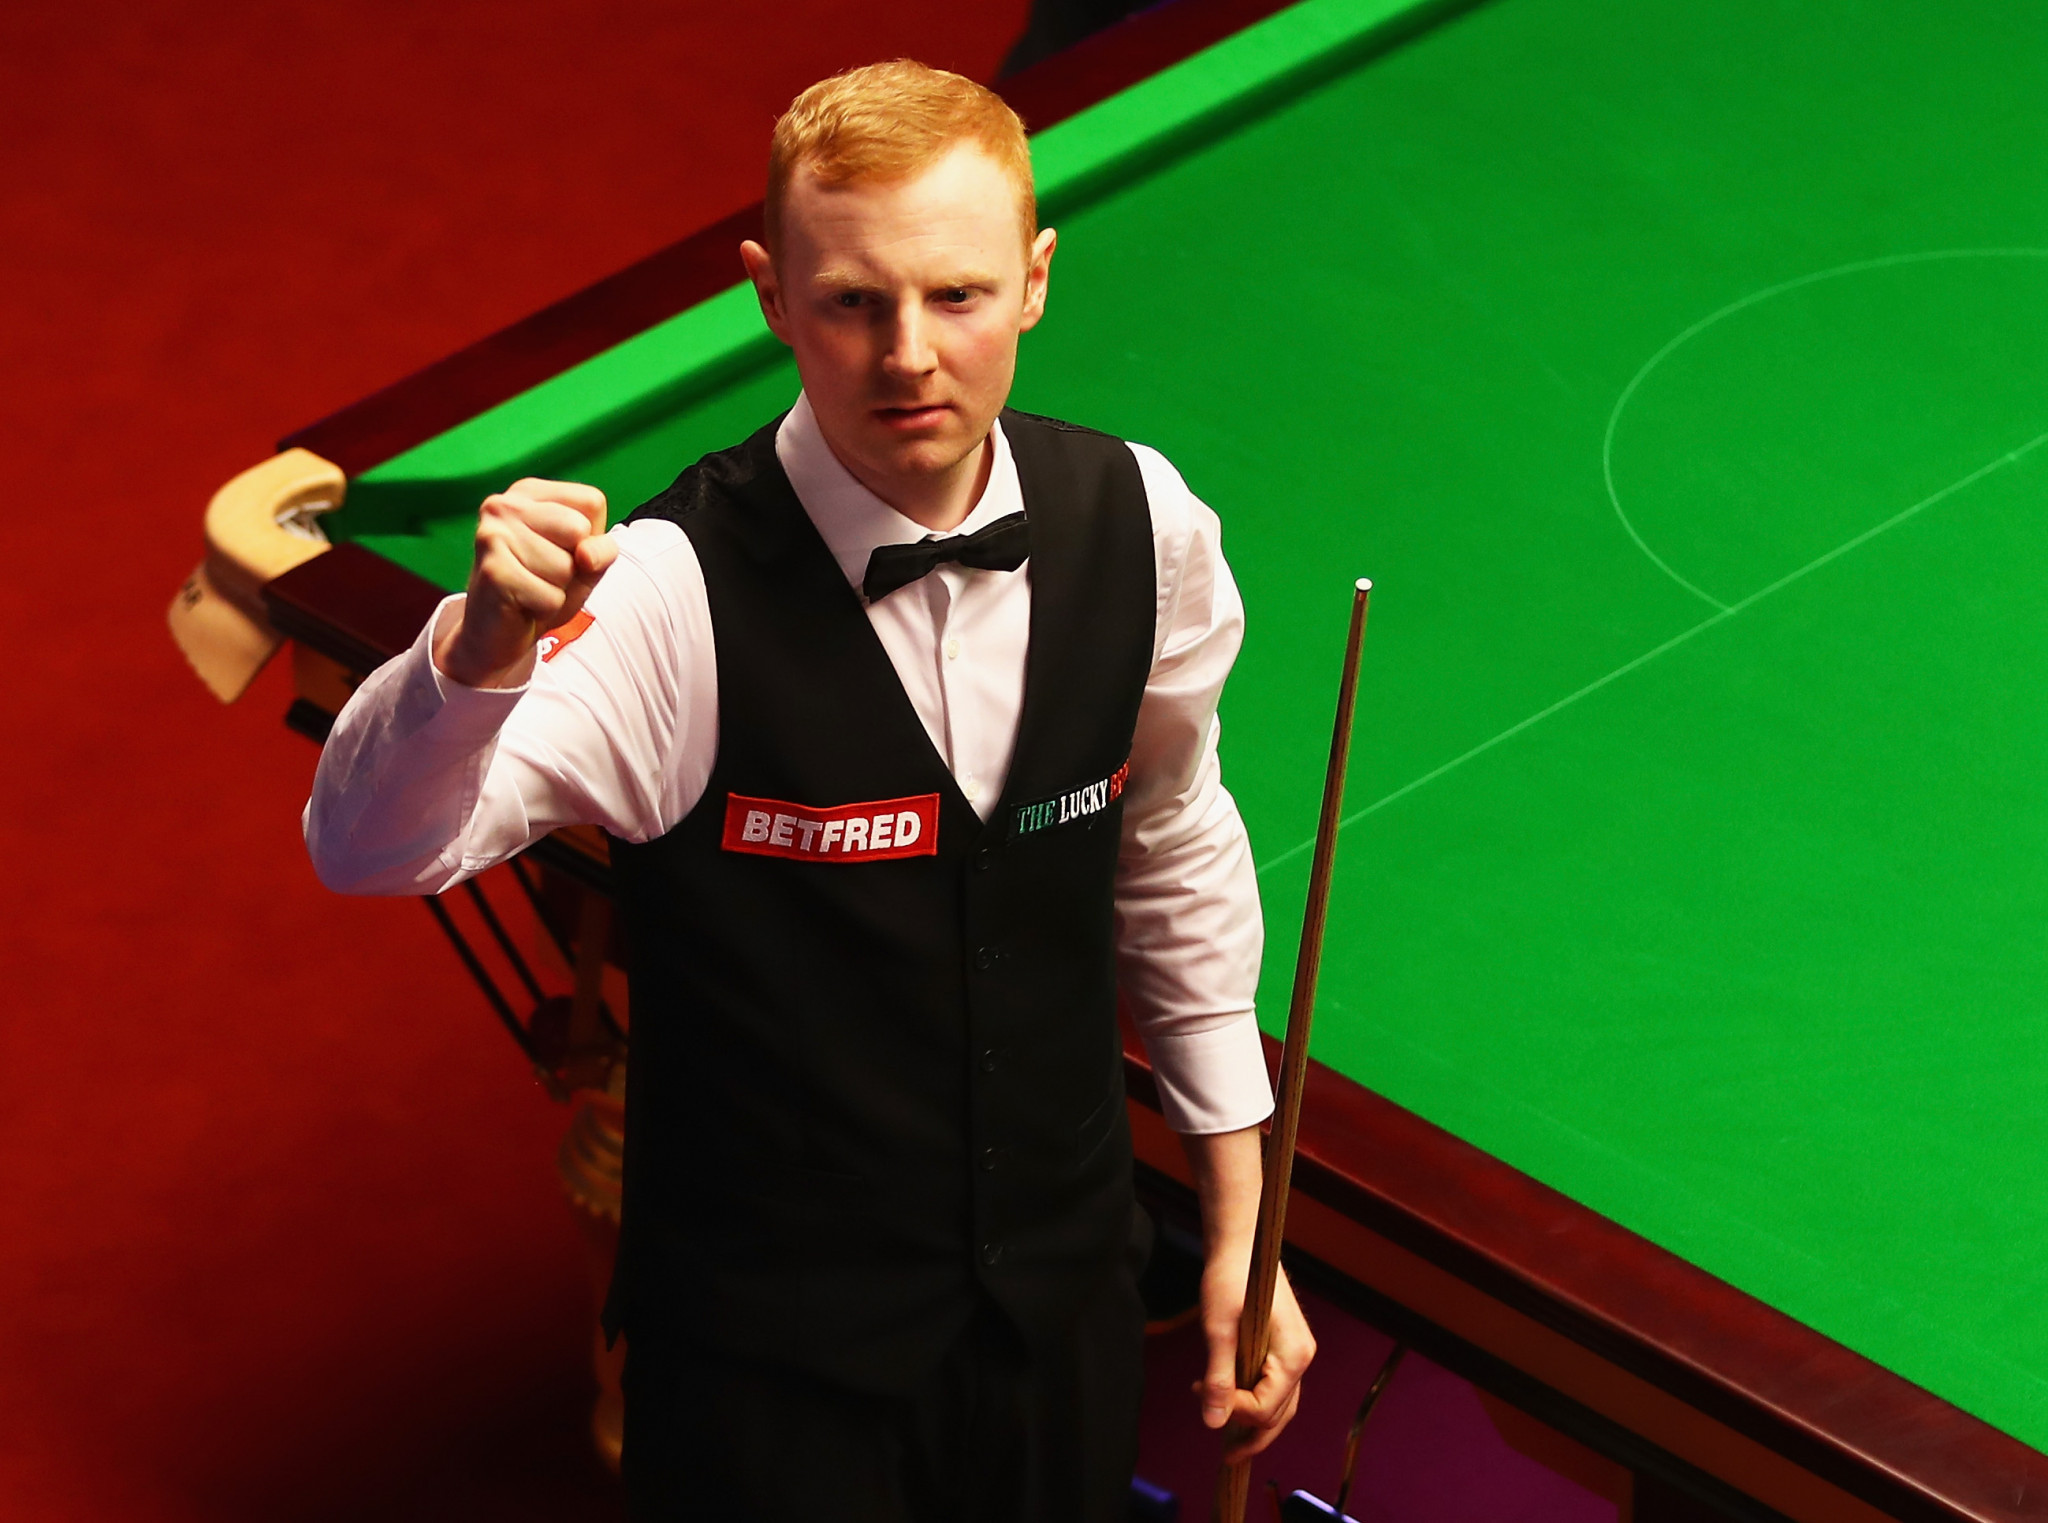 Qualifier McGill recovers from brink of defeat to win dramatic decider at World Snooker Championship